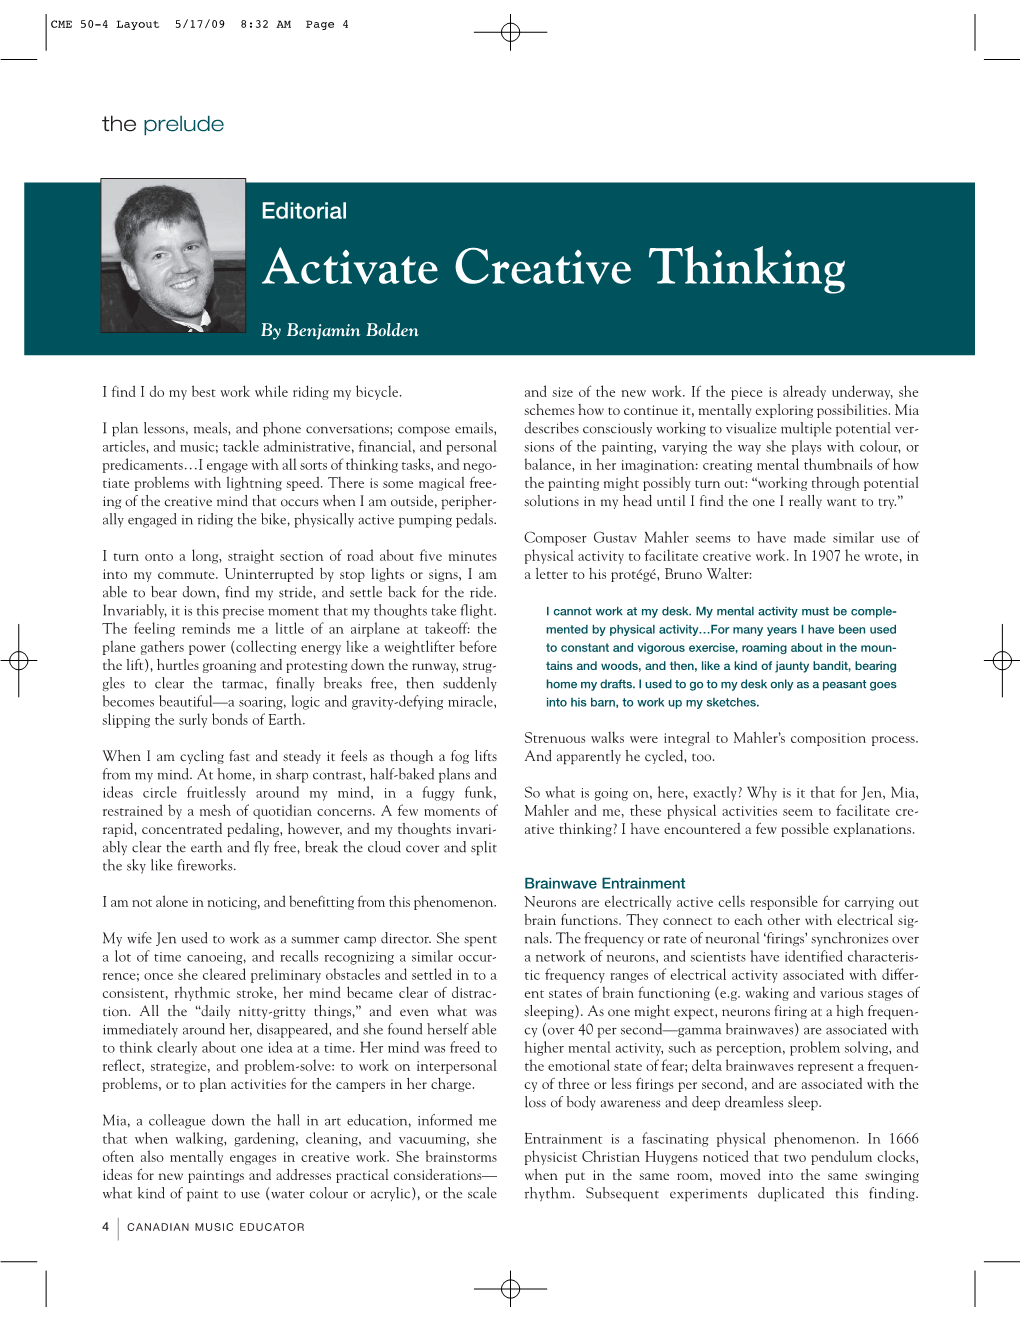 Activate Creative Thinking